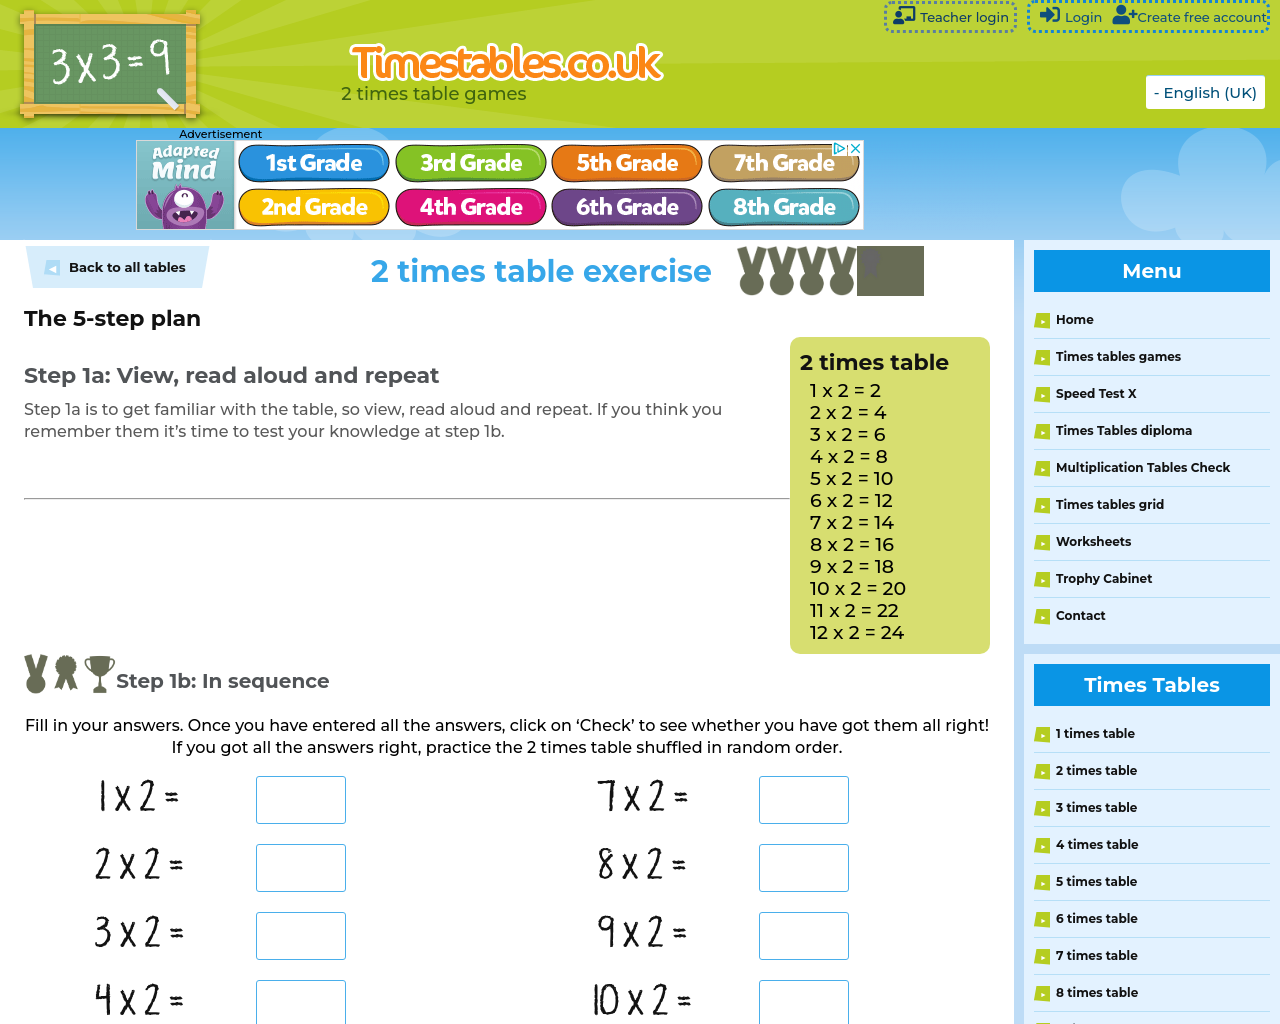 2 times table game